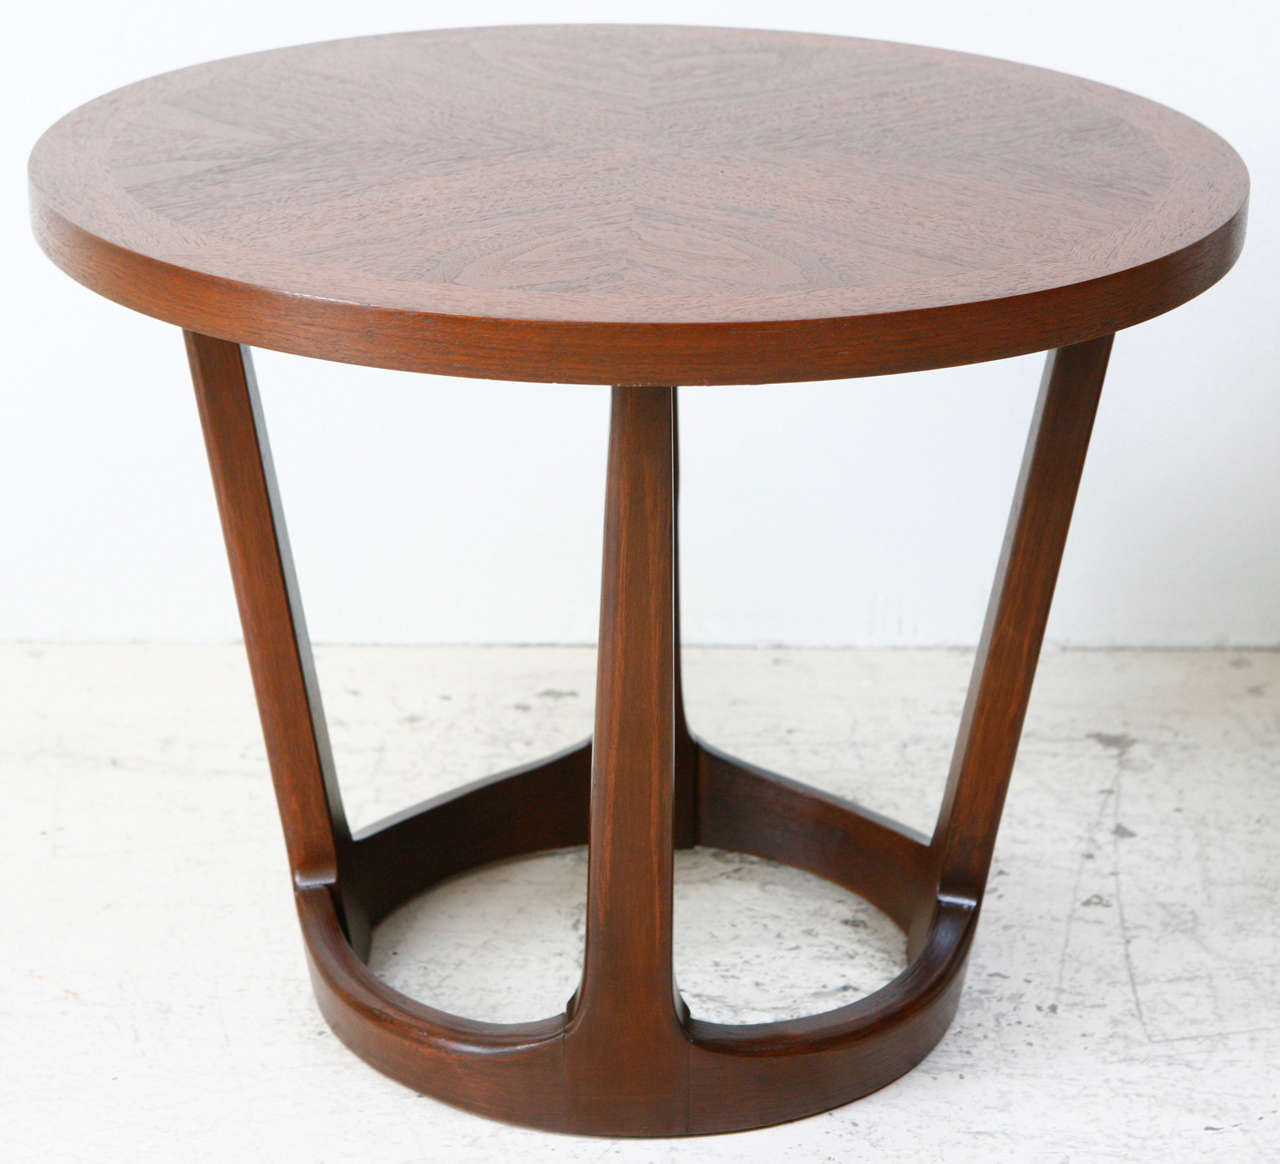 Pair of Mid-Century Side Tables with book-matched walnut vaneer on top and solid walnut bases.  Great TV tables.